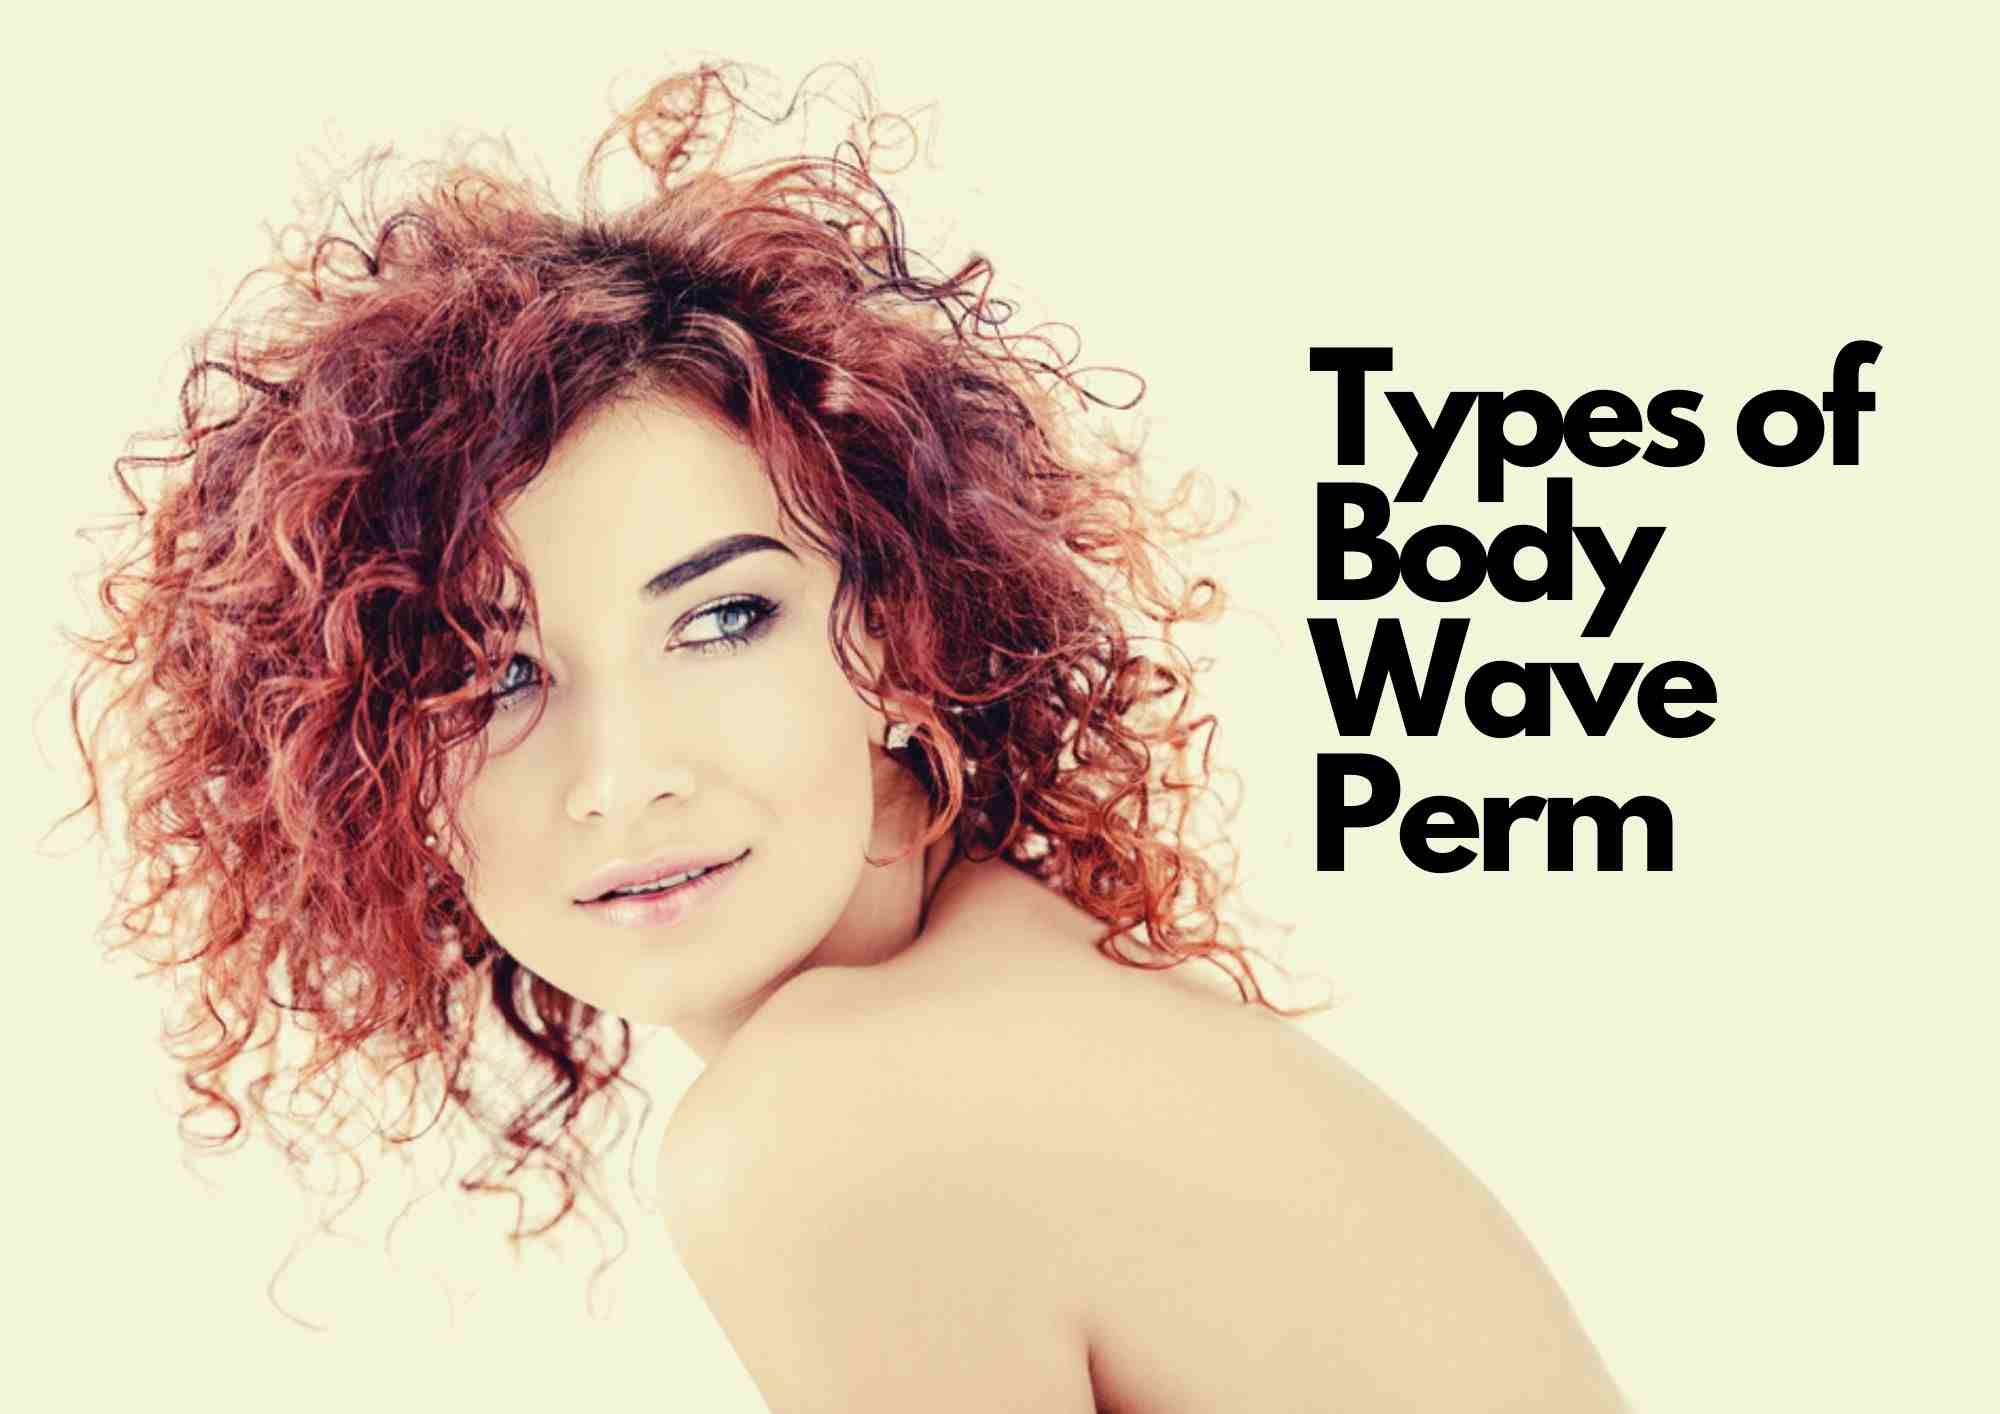 10 Different Types Of Body Wave Perm Explained | Ideas For Your Next Look